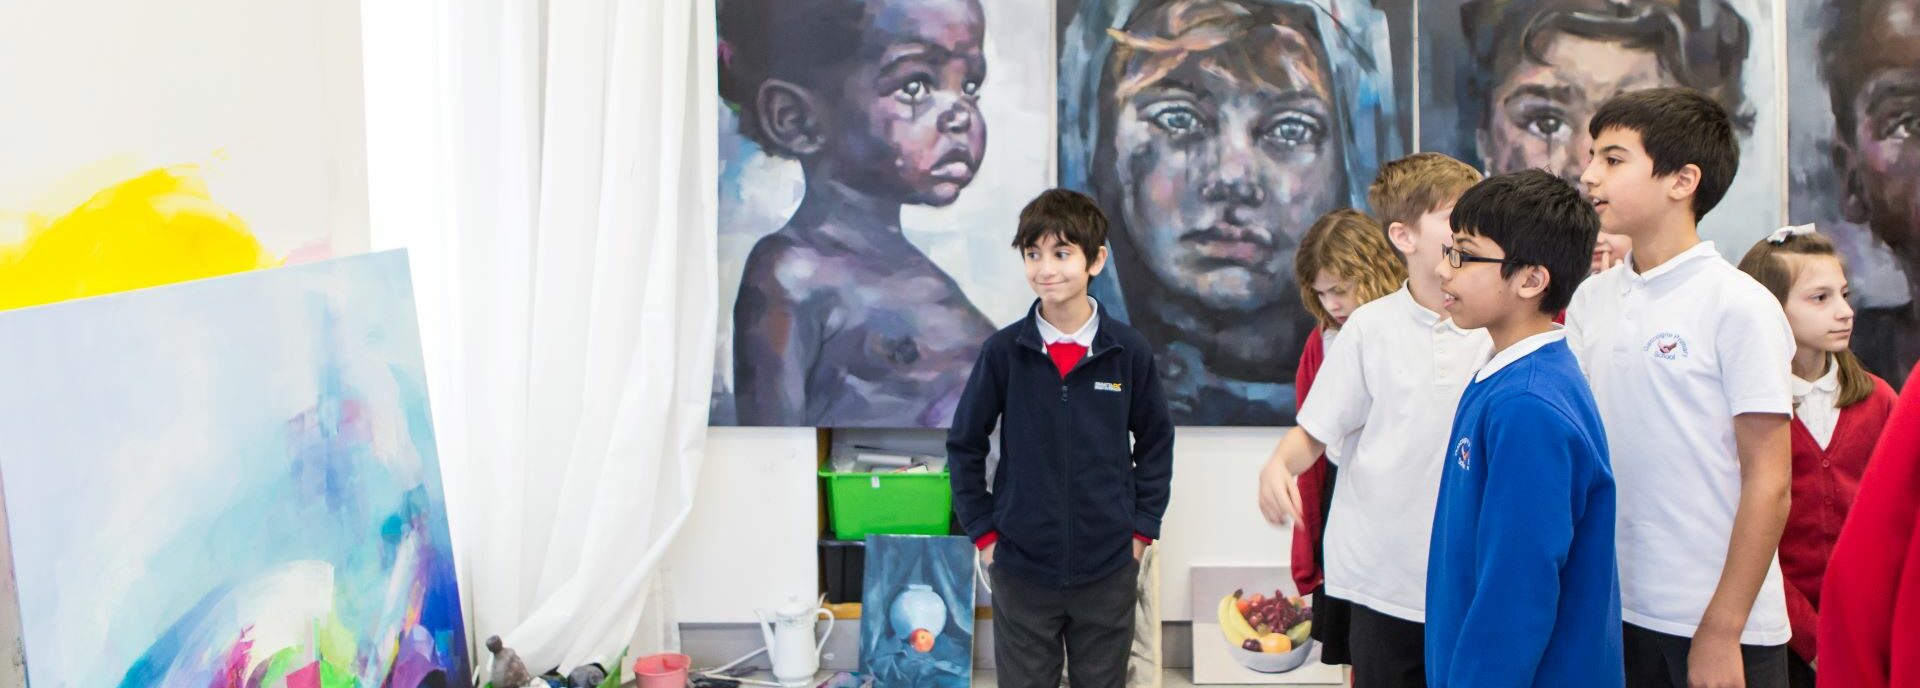 Children look at an abstract painting in an artist's studio, behind them our four paintings of children